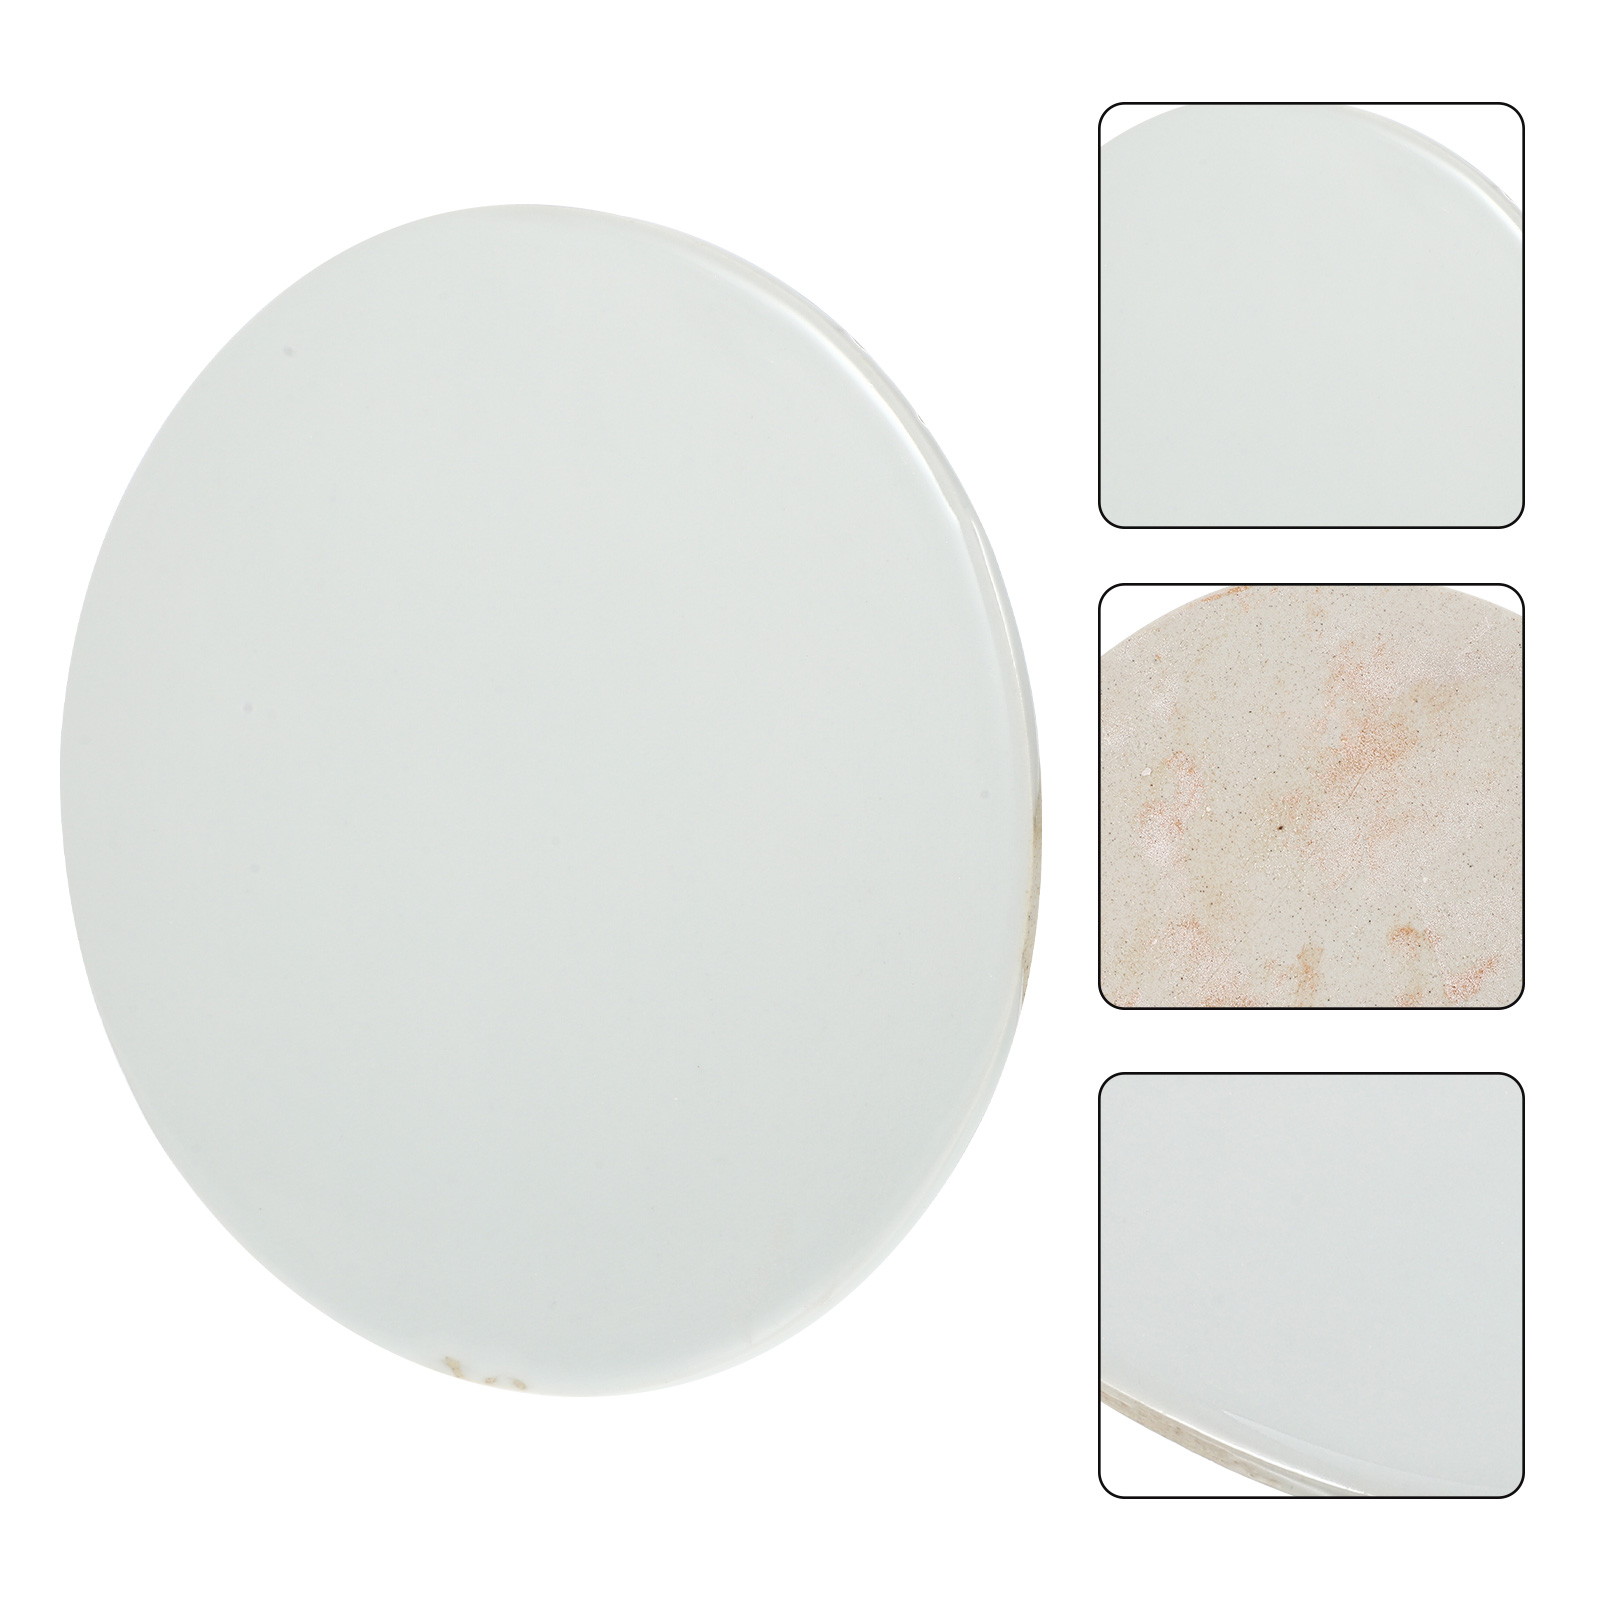 Ceramic Round Tiles Unfinished Plate Coasters Painting Porcelain Plates Blanks Dinner Blank Watercolor - image 3 of 8